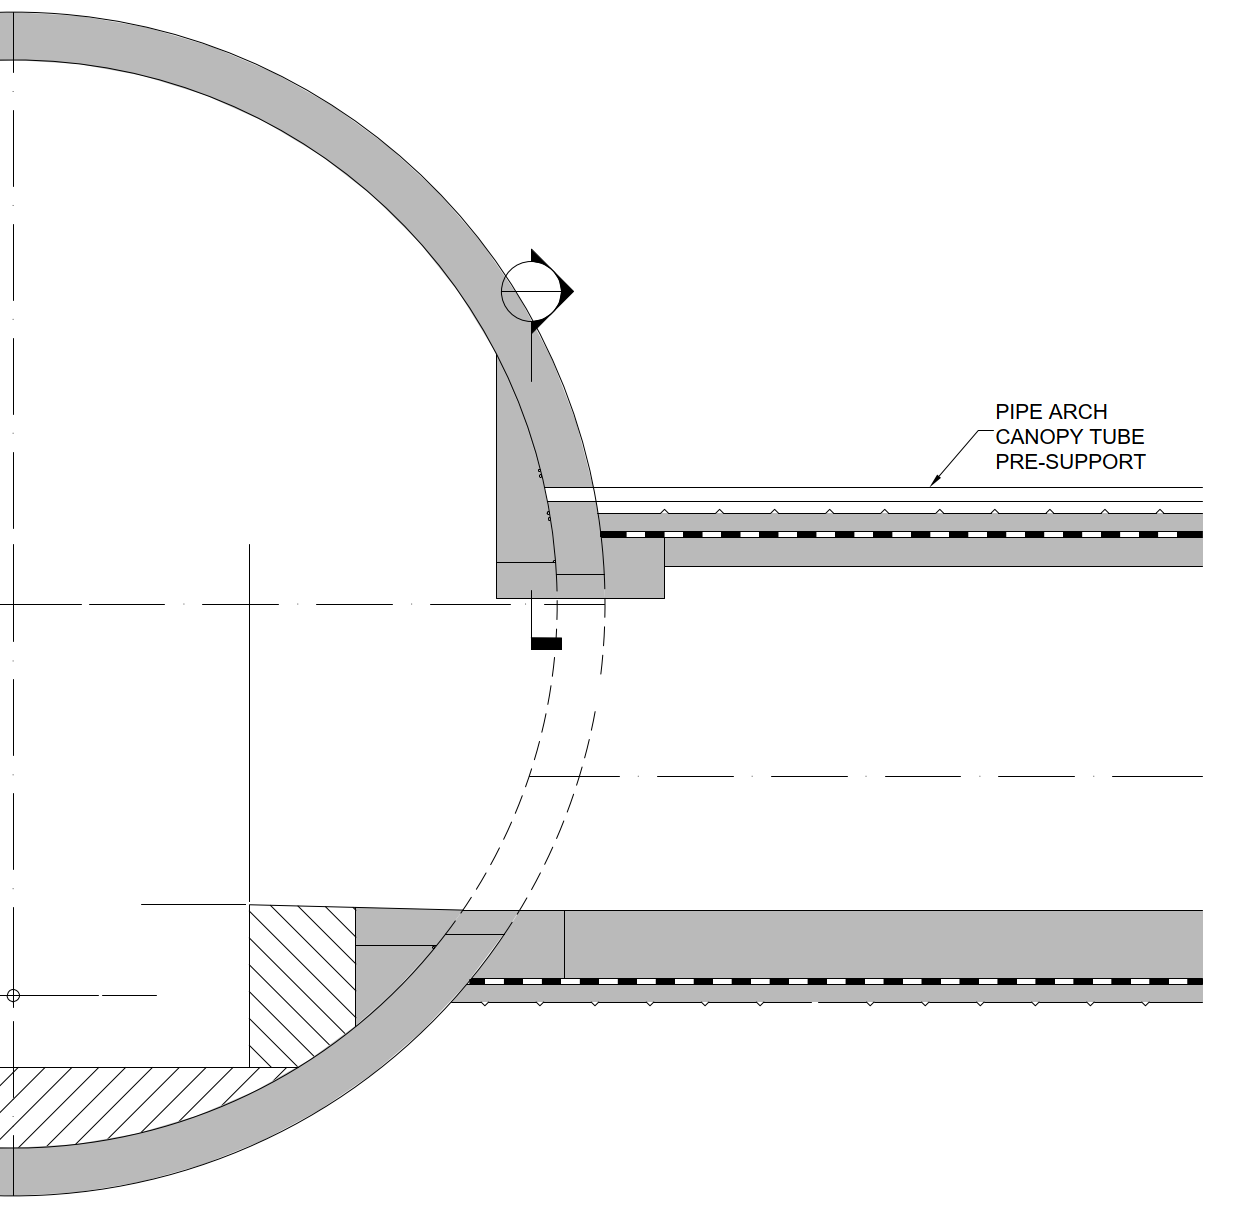 Drawing of a scheme design pipe arch canopy tube concept